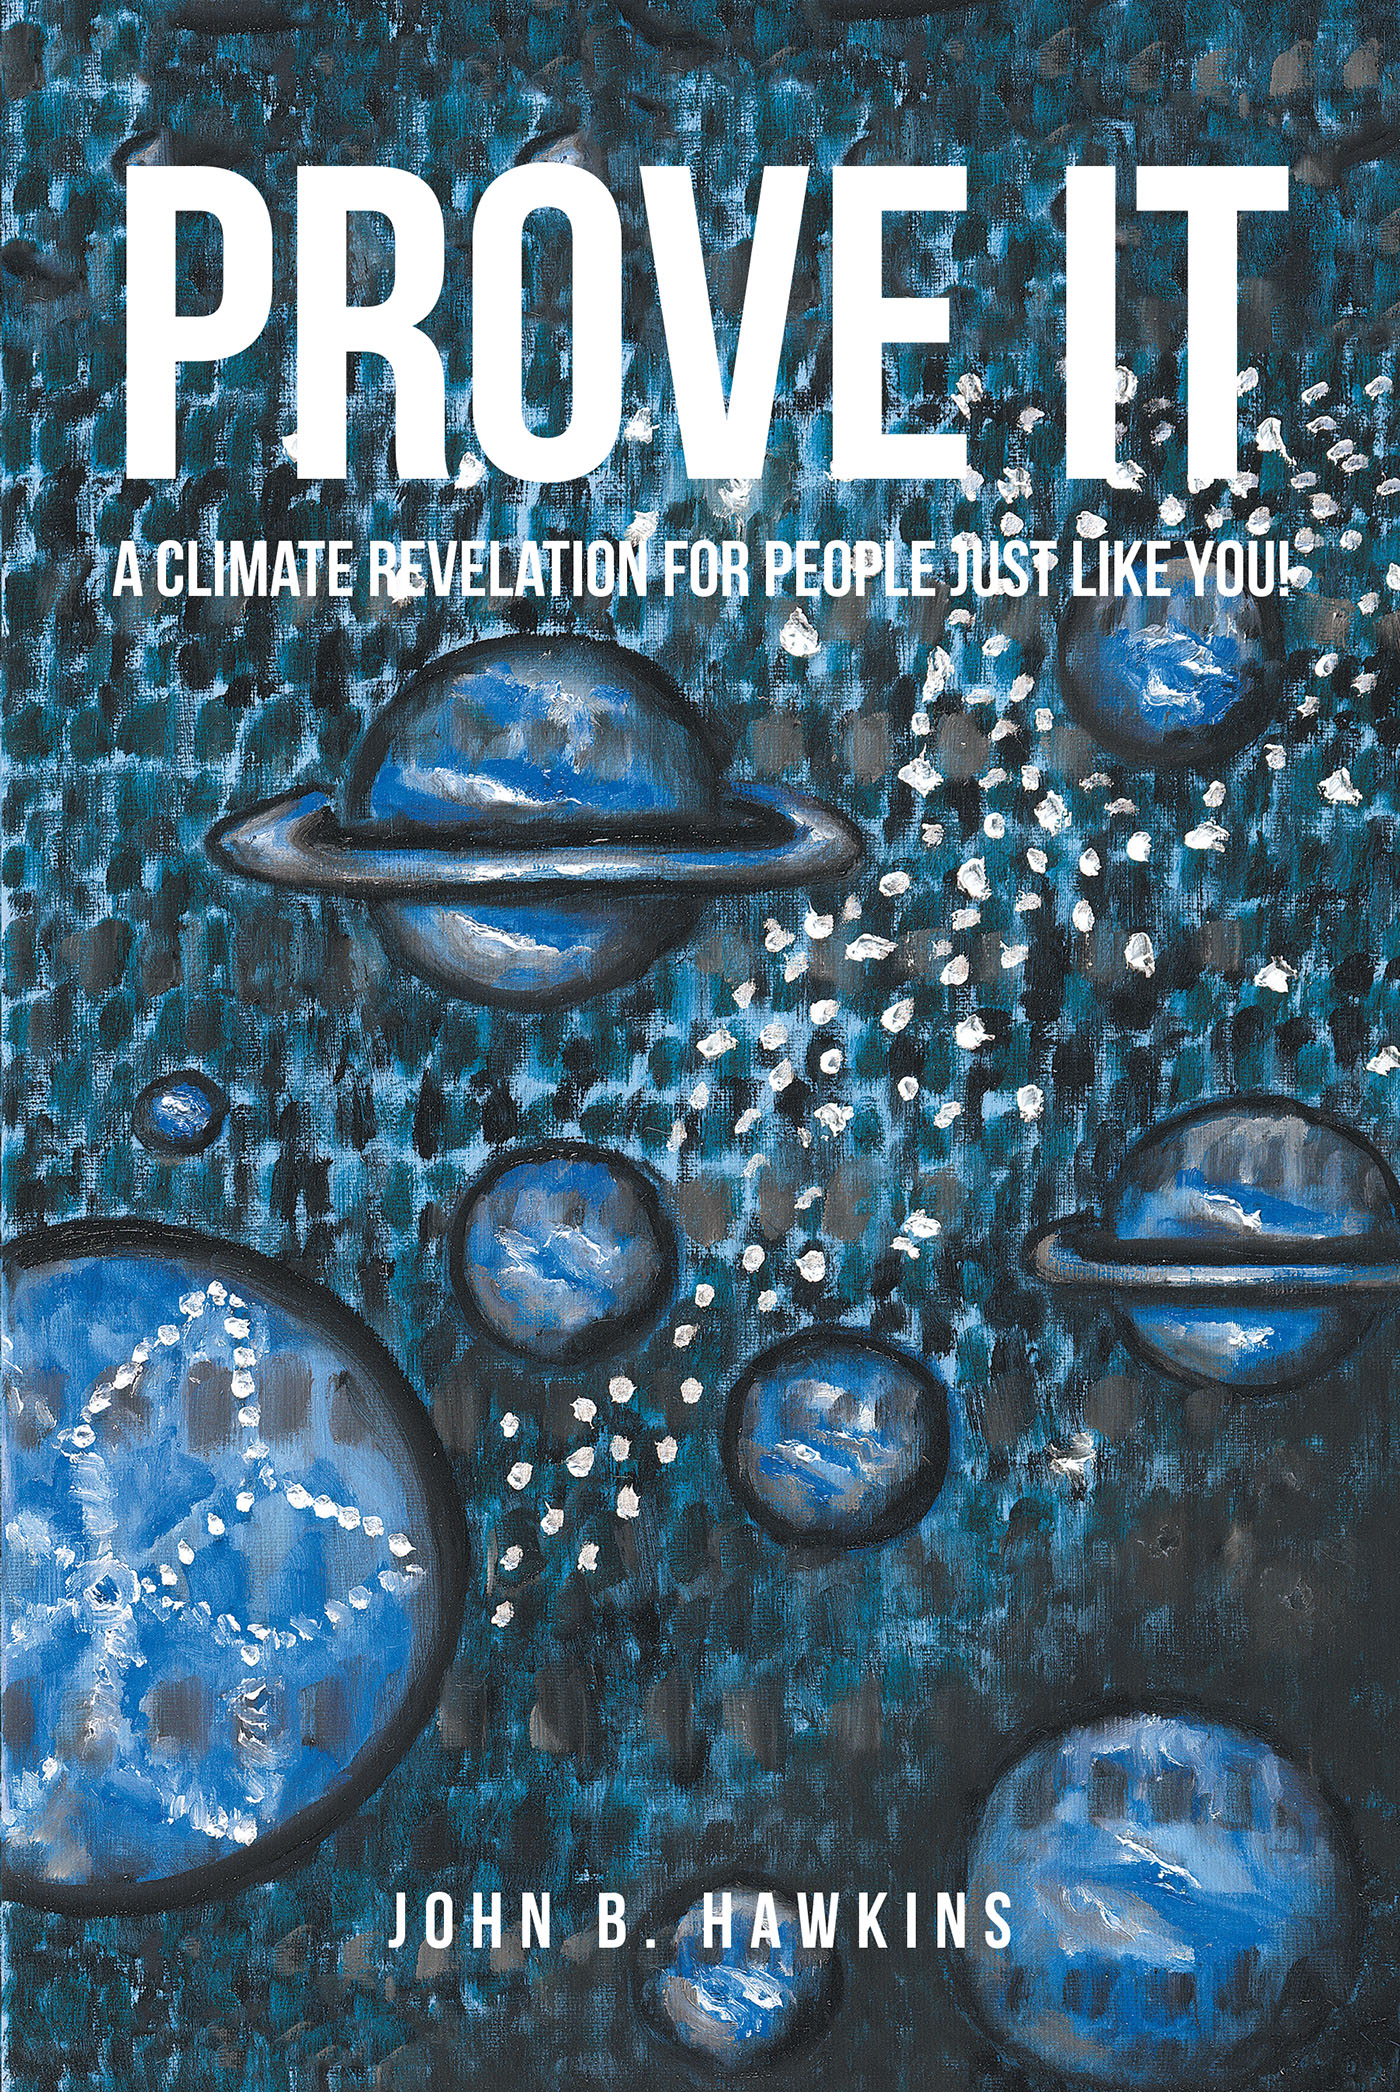 Author John B. Hawkins’s new book, “Prove It: A Climate Revelation for People Just Like You!” Presents Scientific Evidence Supporting a New Theory About Climate Change